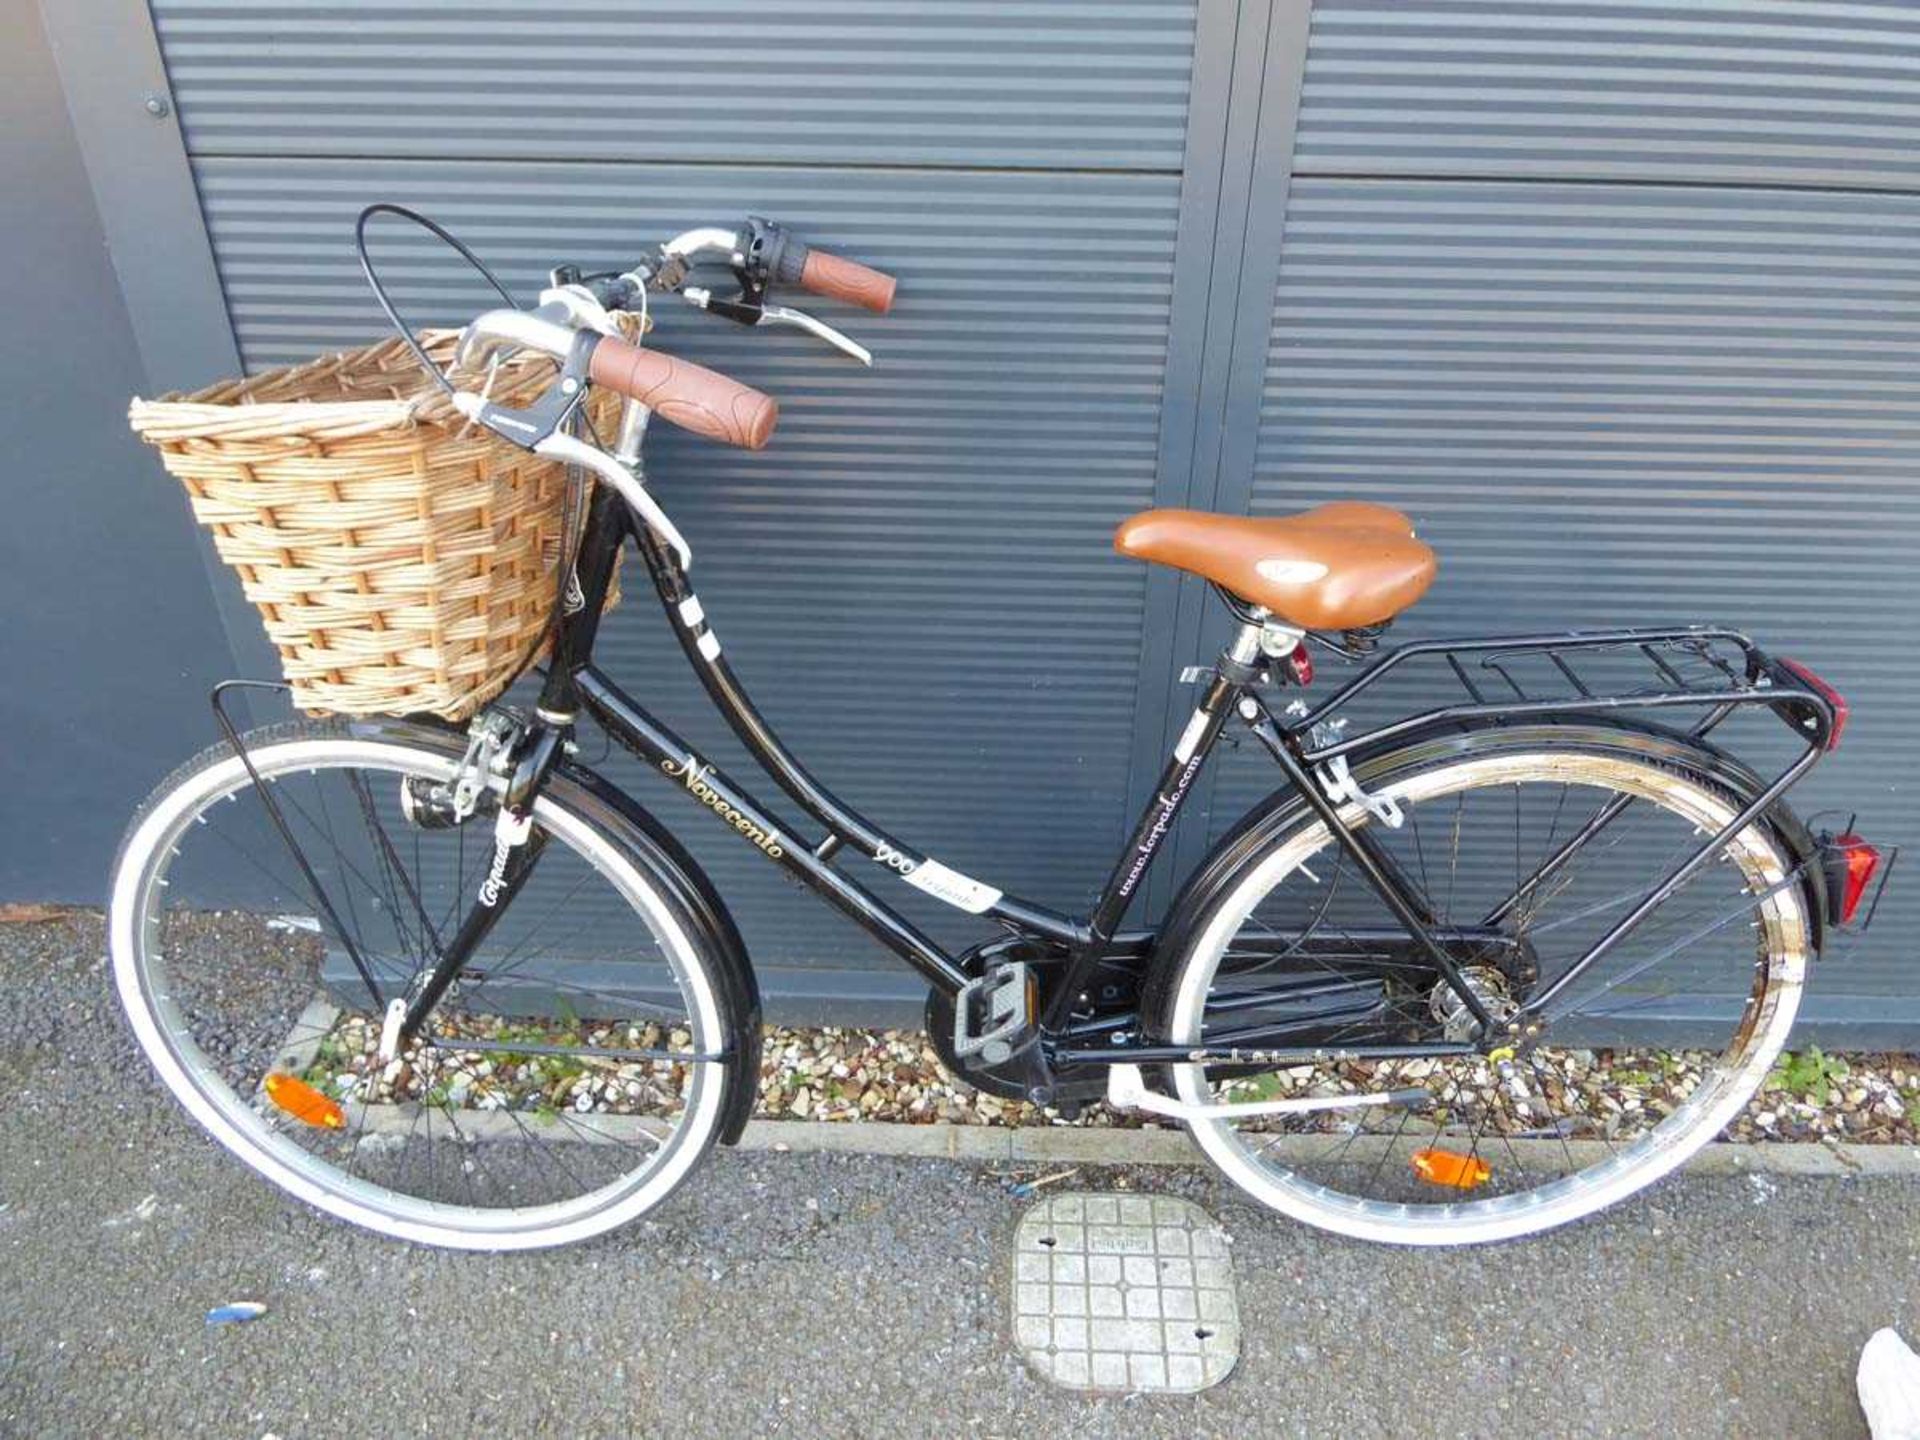 Novecento lady's bike with front basket